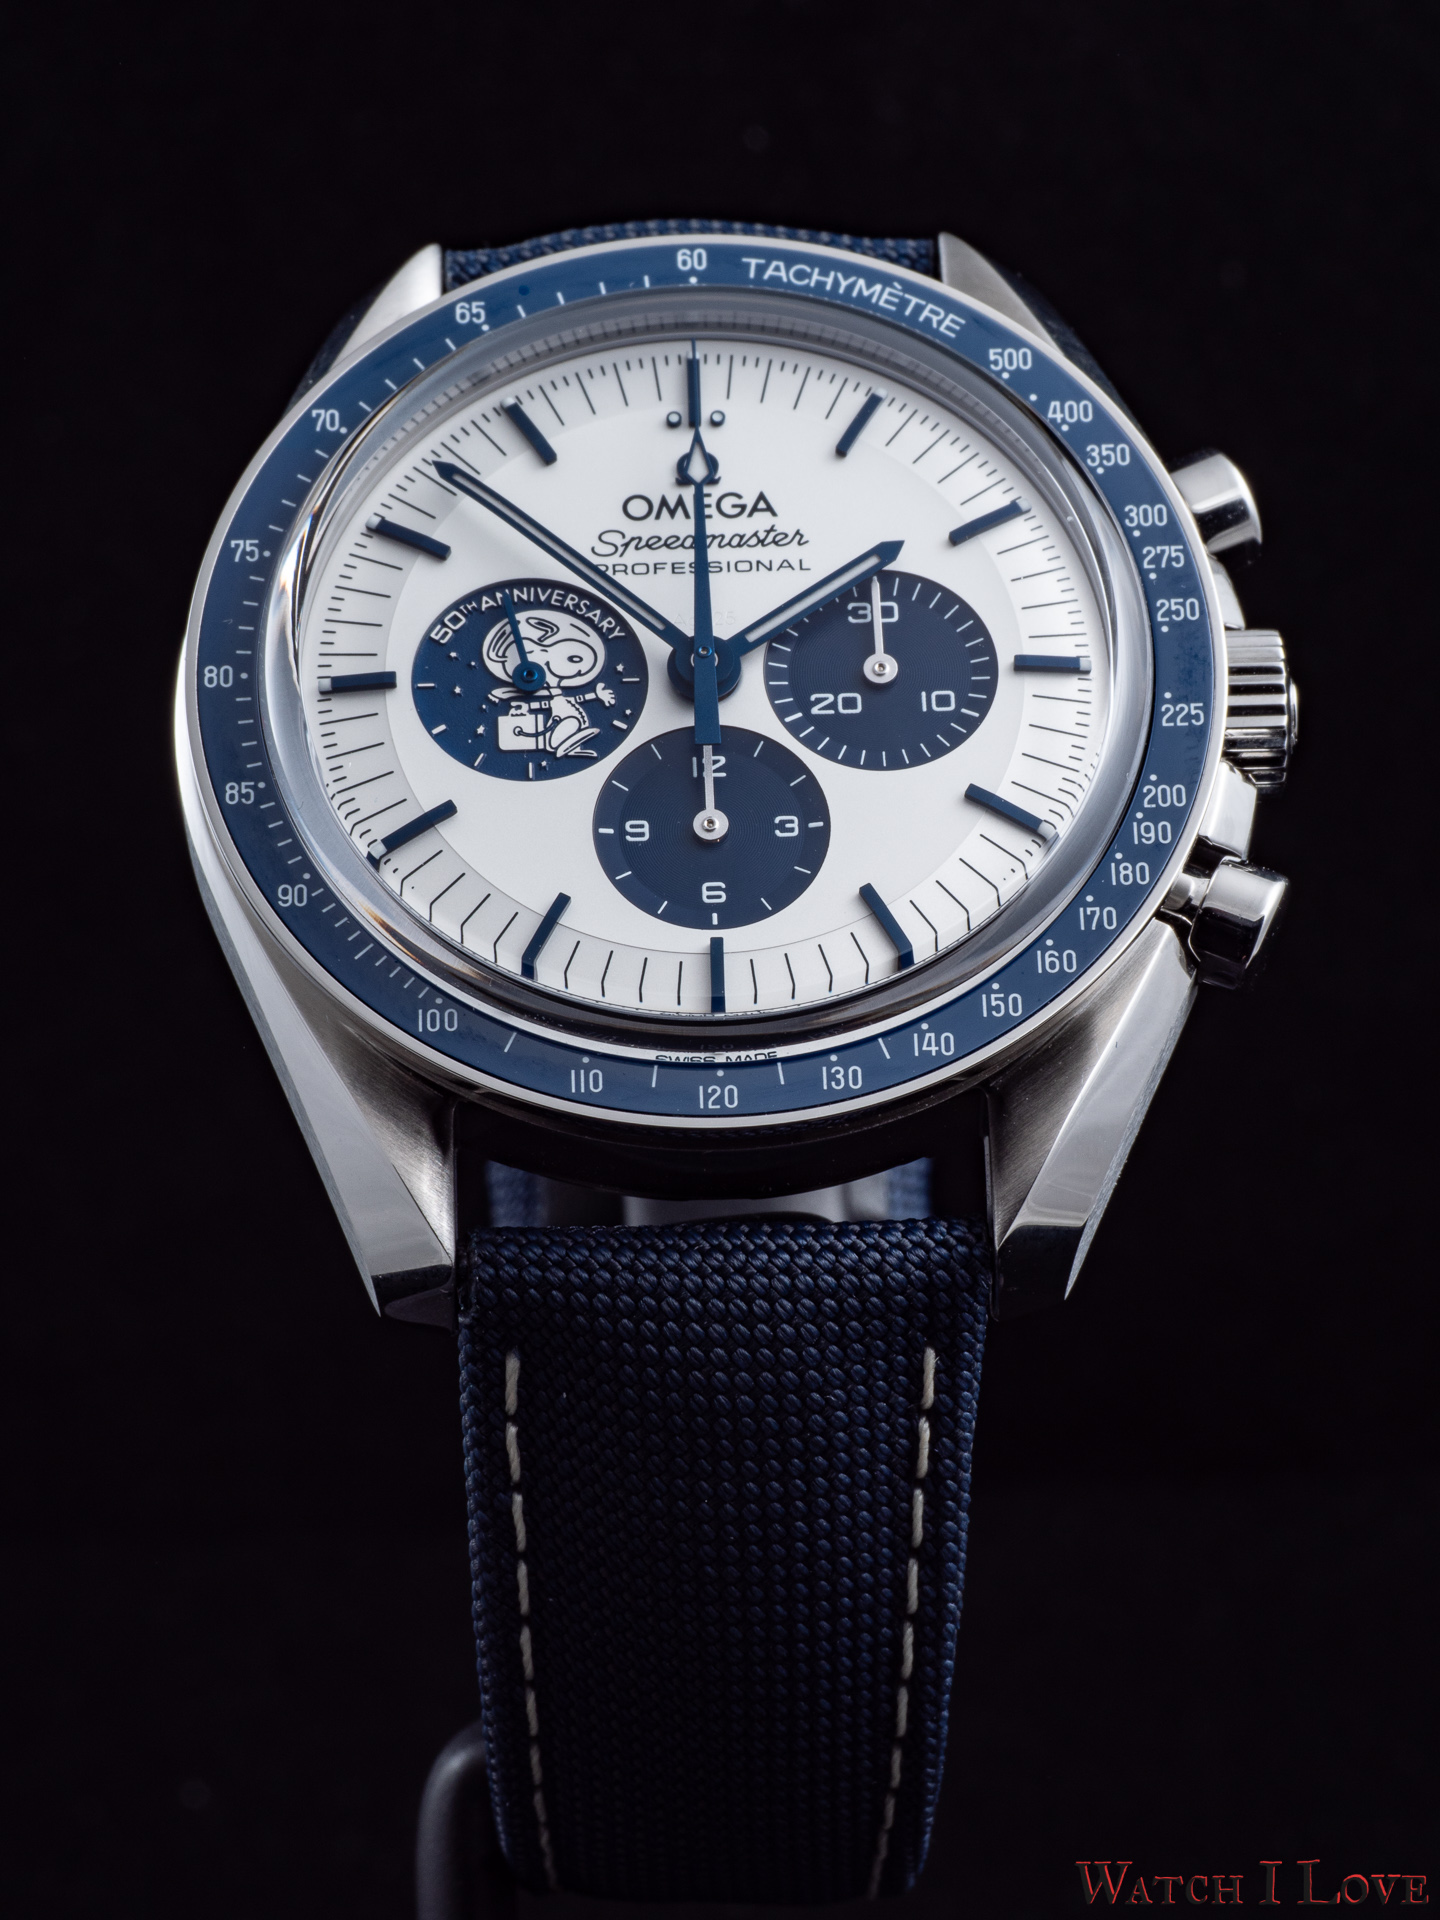 Omega Introduces the Speedmaster “Silver Snoopy Award” 50th Anniversary